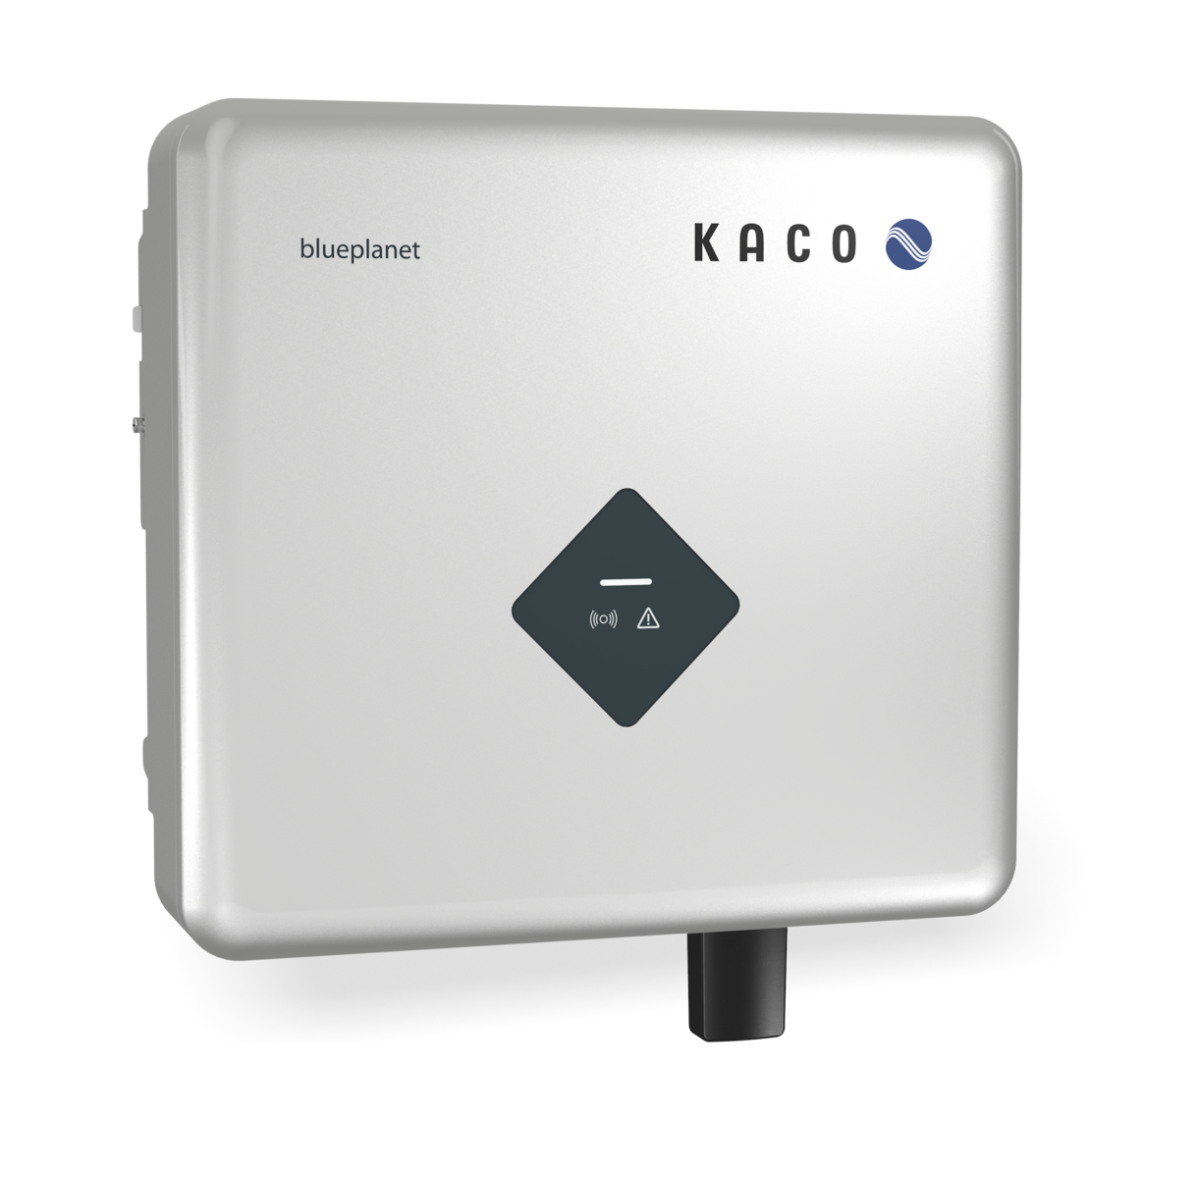 blue planet NX1 M2 series of string inverters from KACO new energy